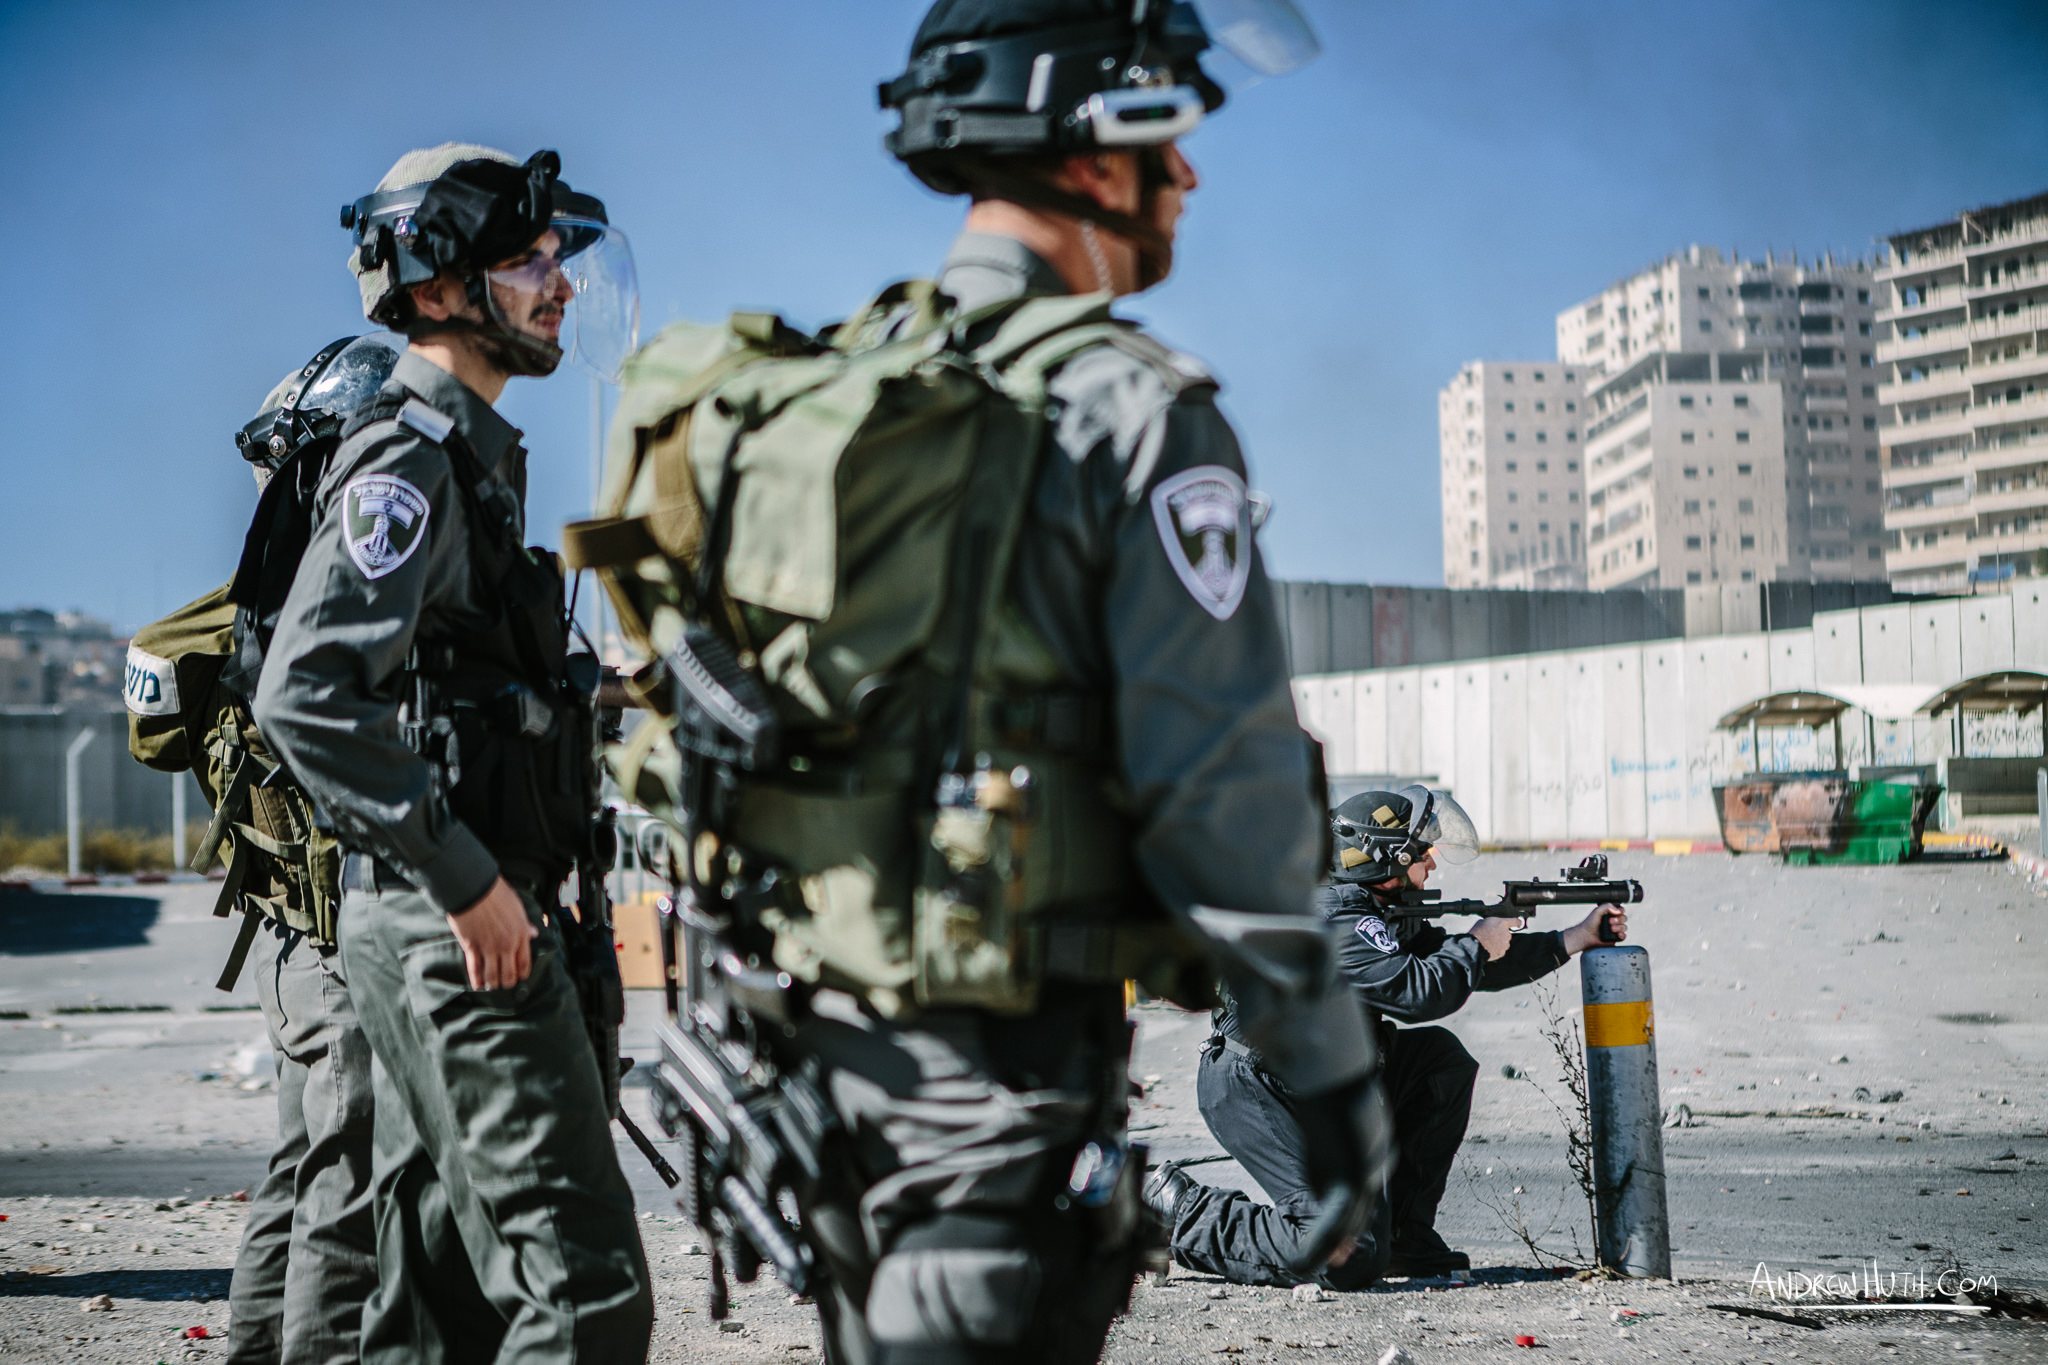  Israeli military using tear gas and guns in an armed conflict with the residents of Shu'afat Refugee Camp.  Palestinian youth clash with Israeli military in Shu'afat Refugee Camp in East Jerusalem on Friday, November 7, 2014. &nbsp;The recent, but t